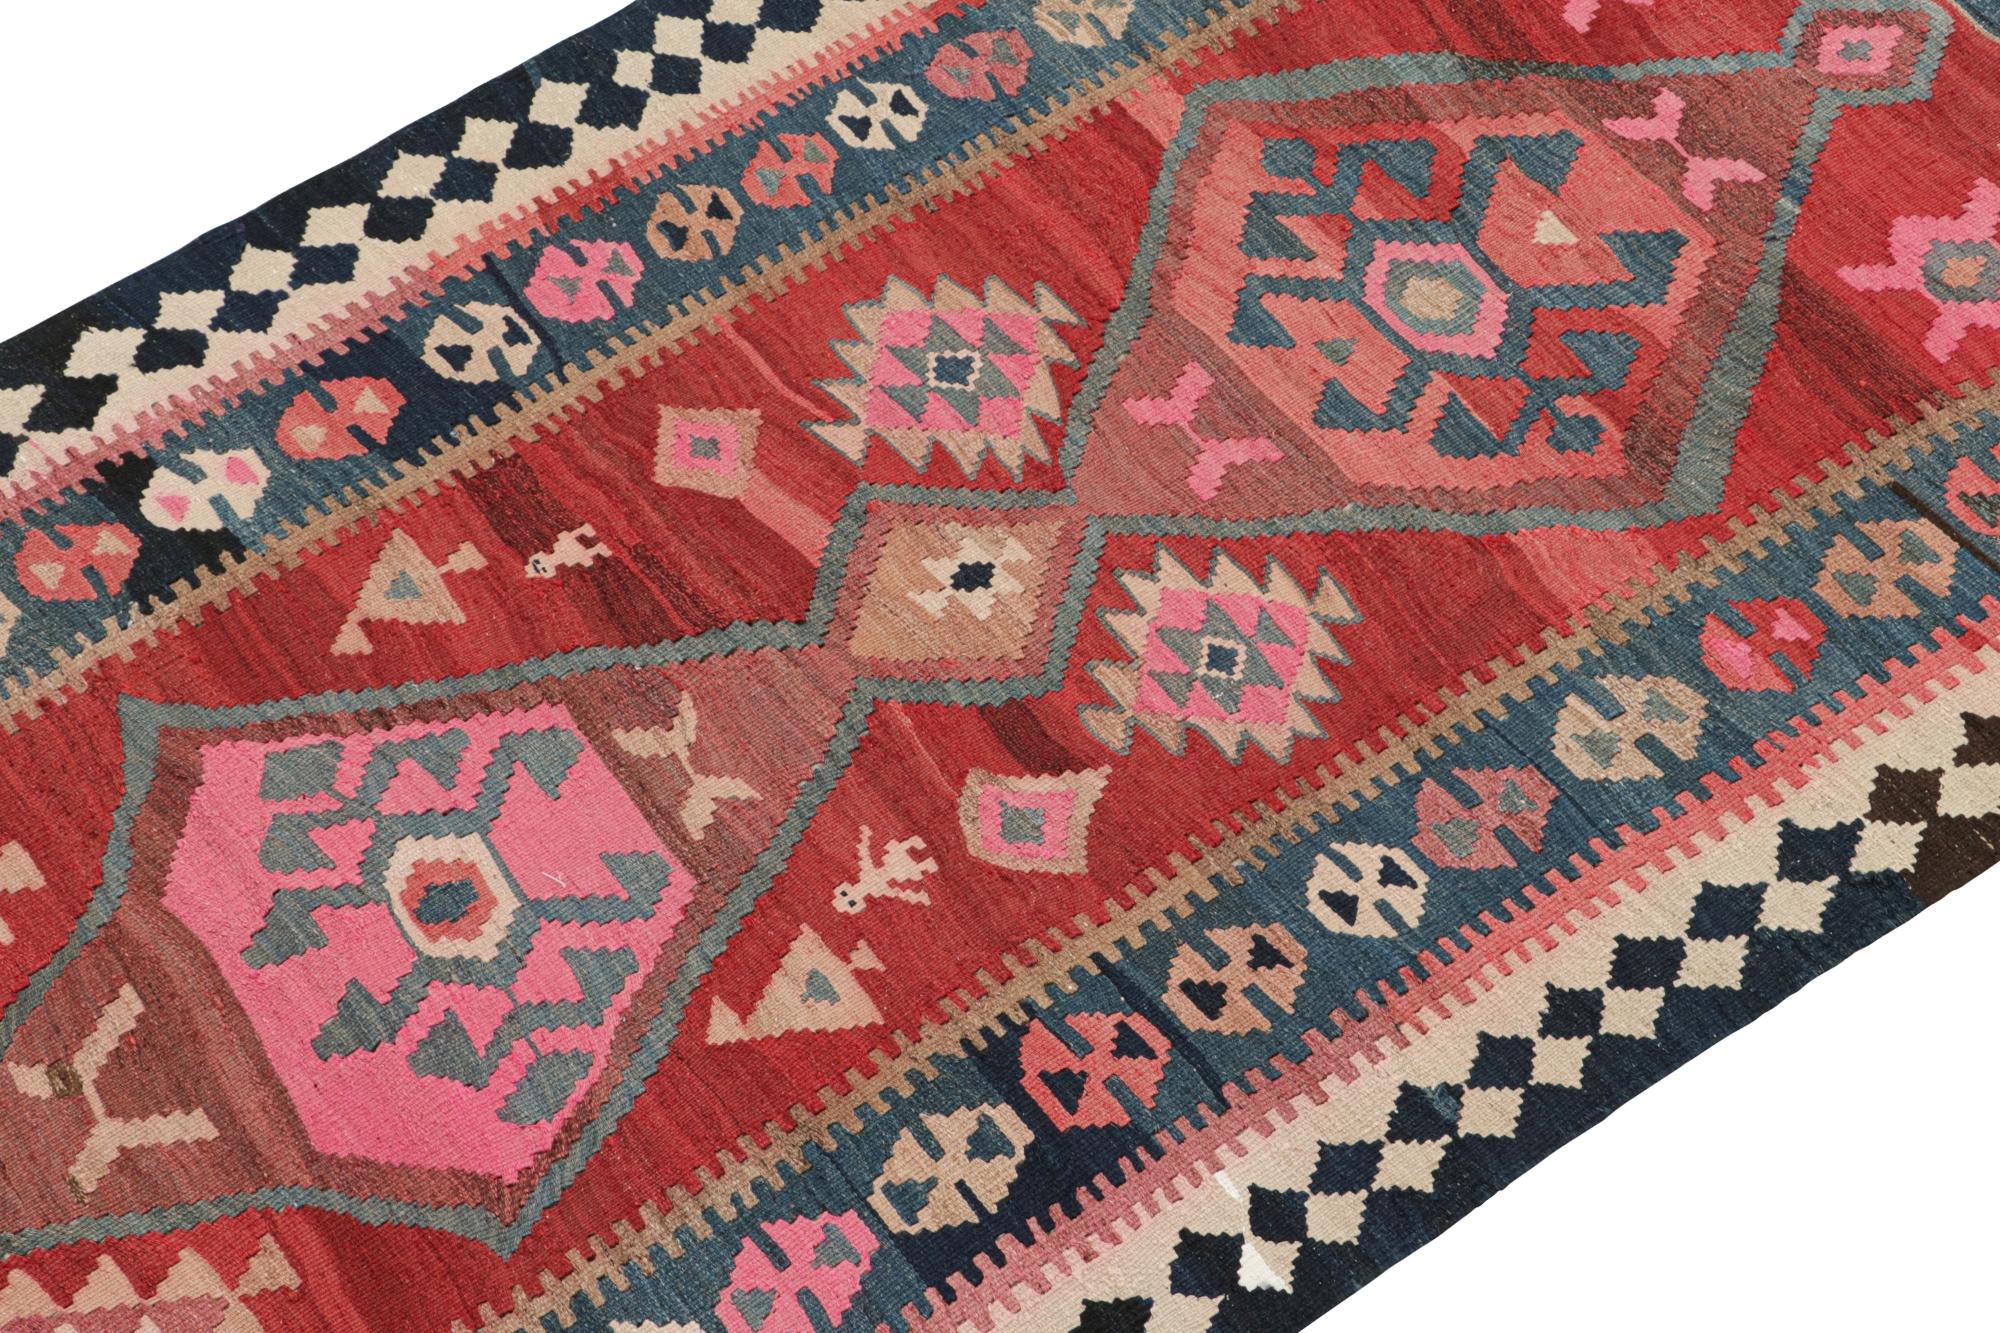 This vintage 4x9 Shahsavan Persian kilim is handwoven in wool, and originates circa 1950-1960.

On the Design:

This rare piece enjoys medallions on the open field favouring red, beige-brown & blue with hints of vibrant pink - beautifully